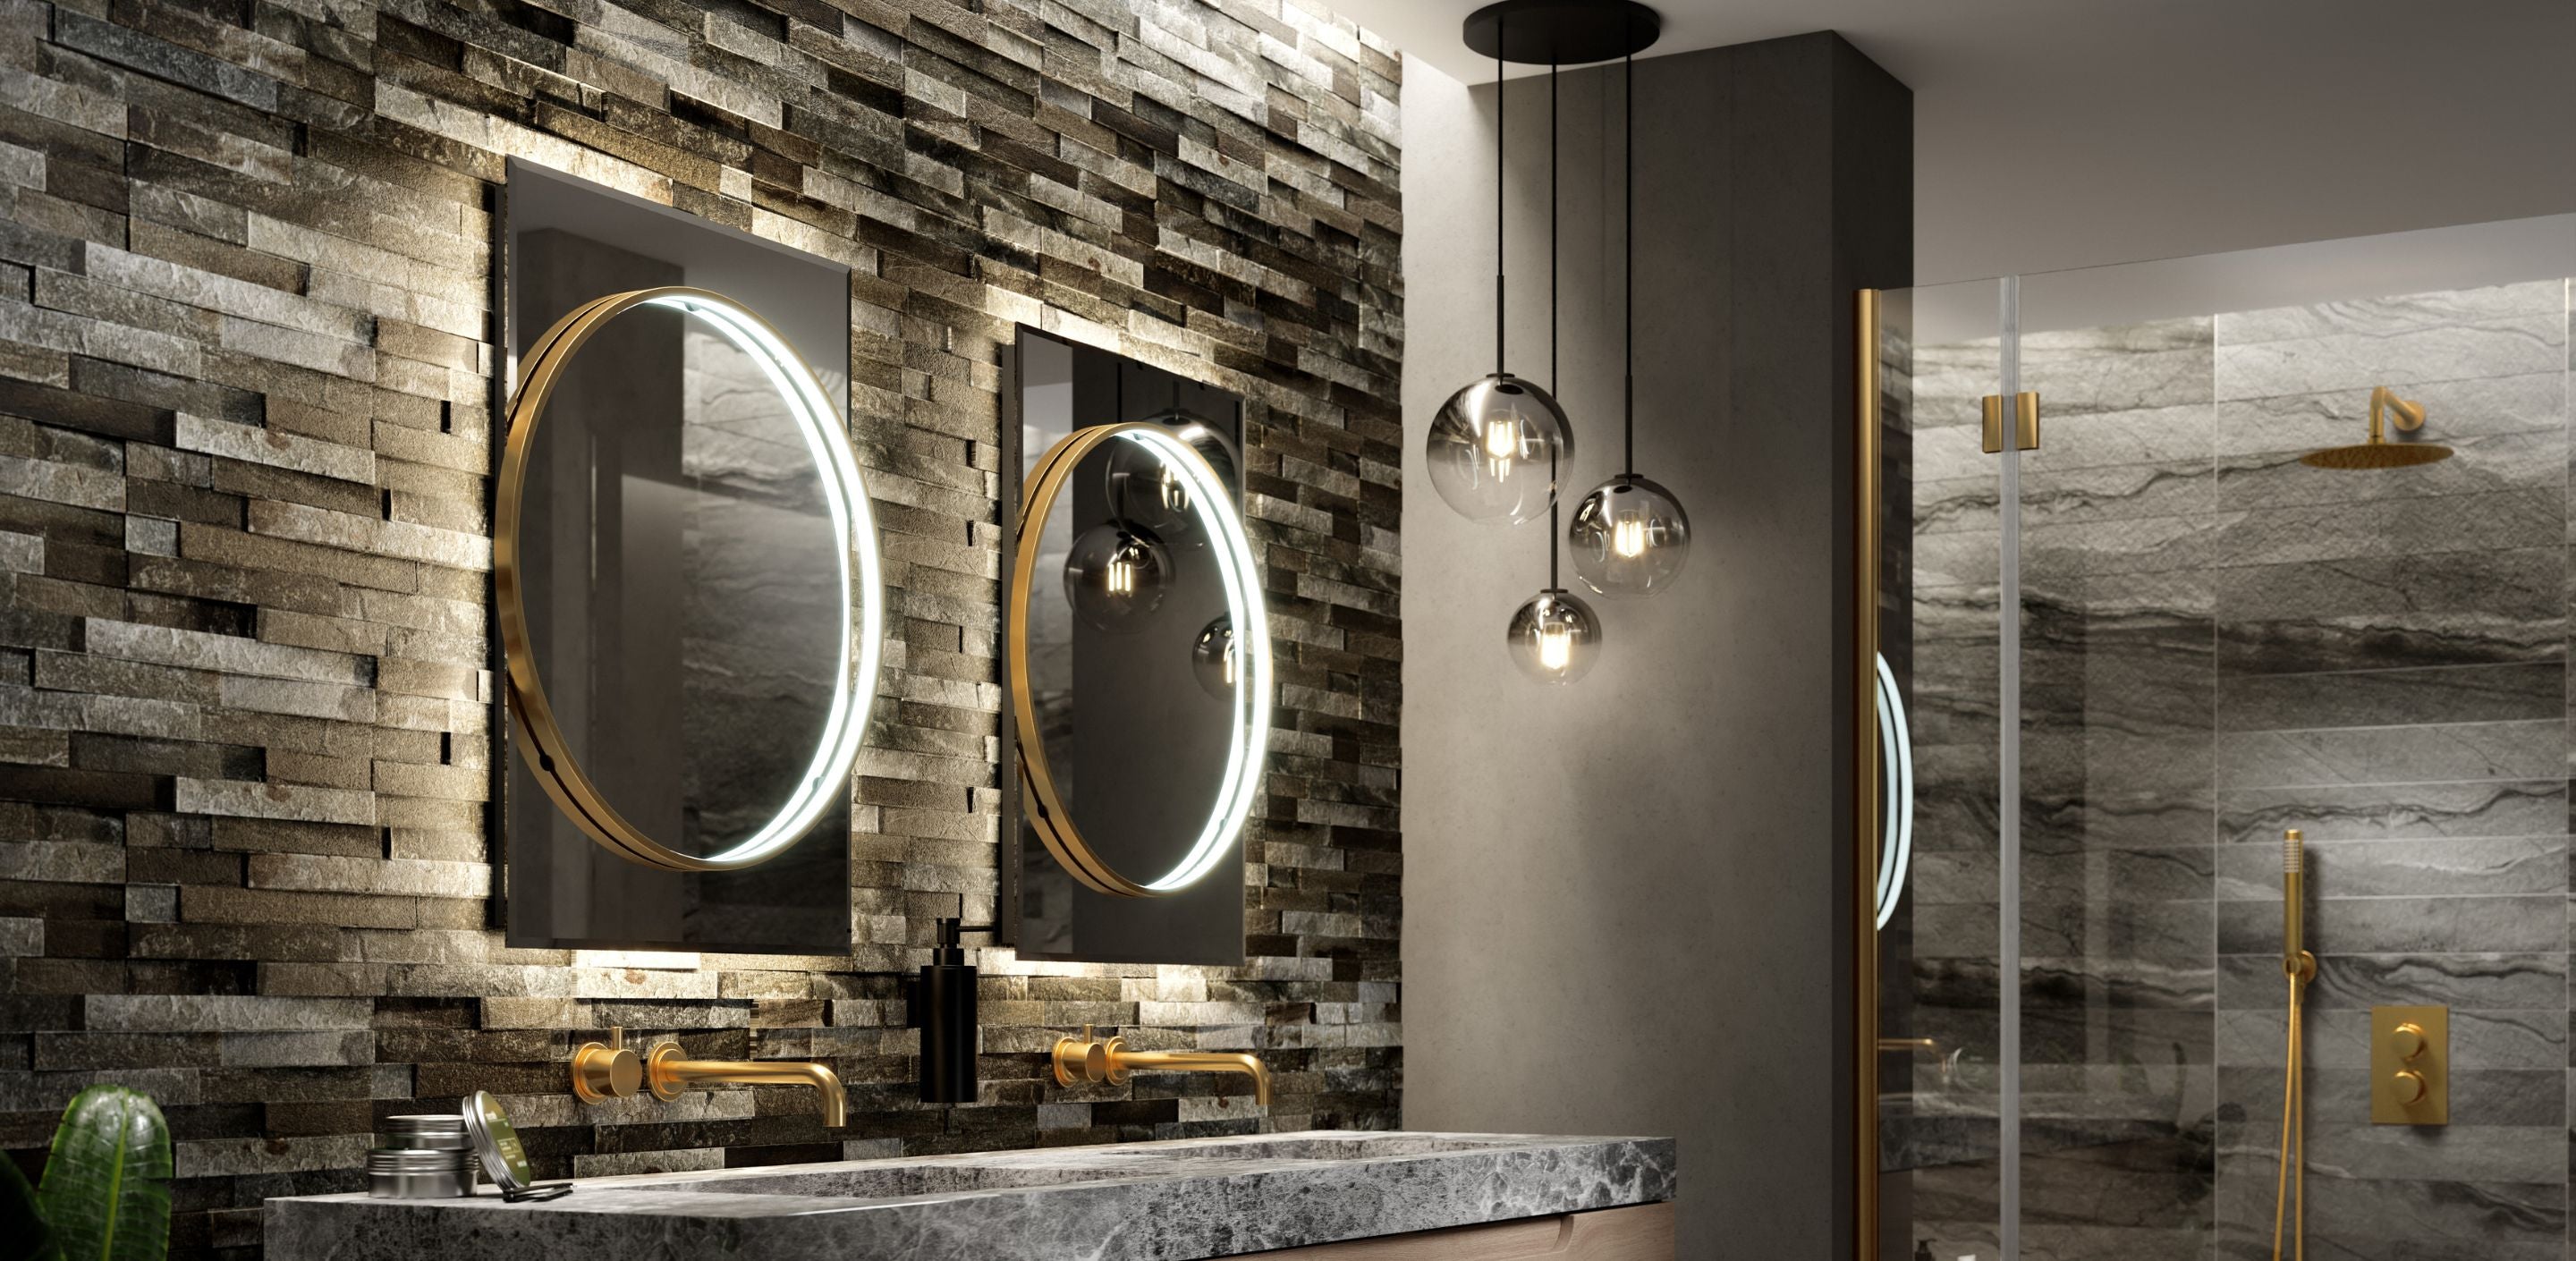 What are the current trends in bathroom mirrors?